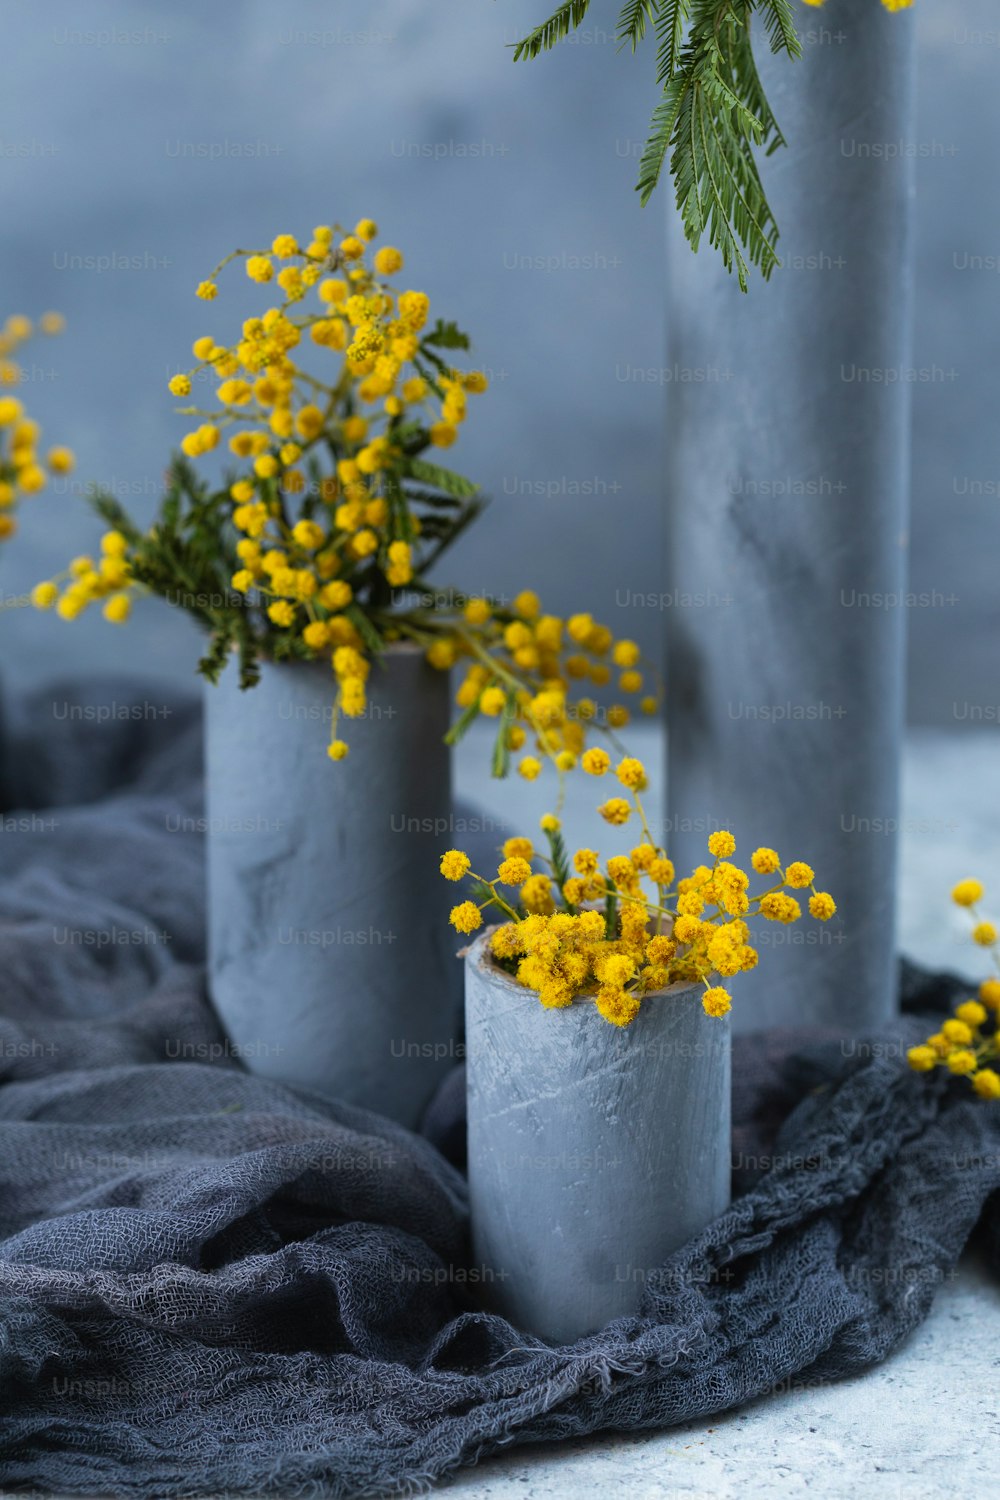 three cement vases with yellow flowers in them